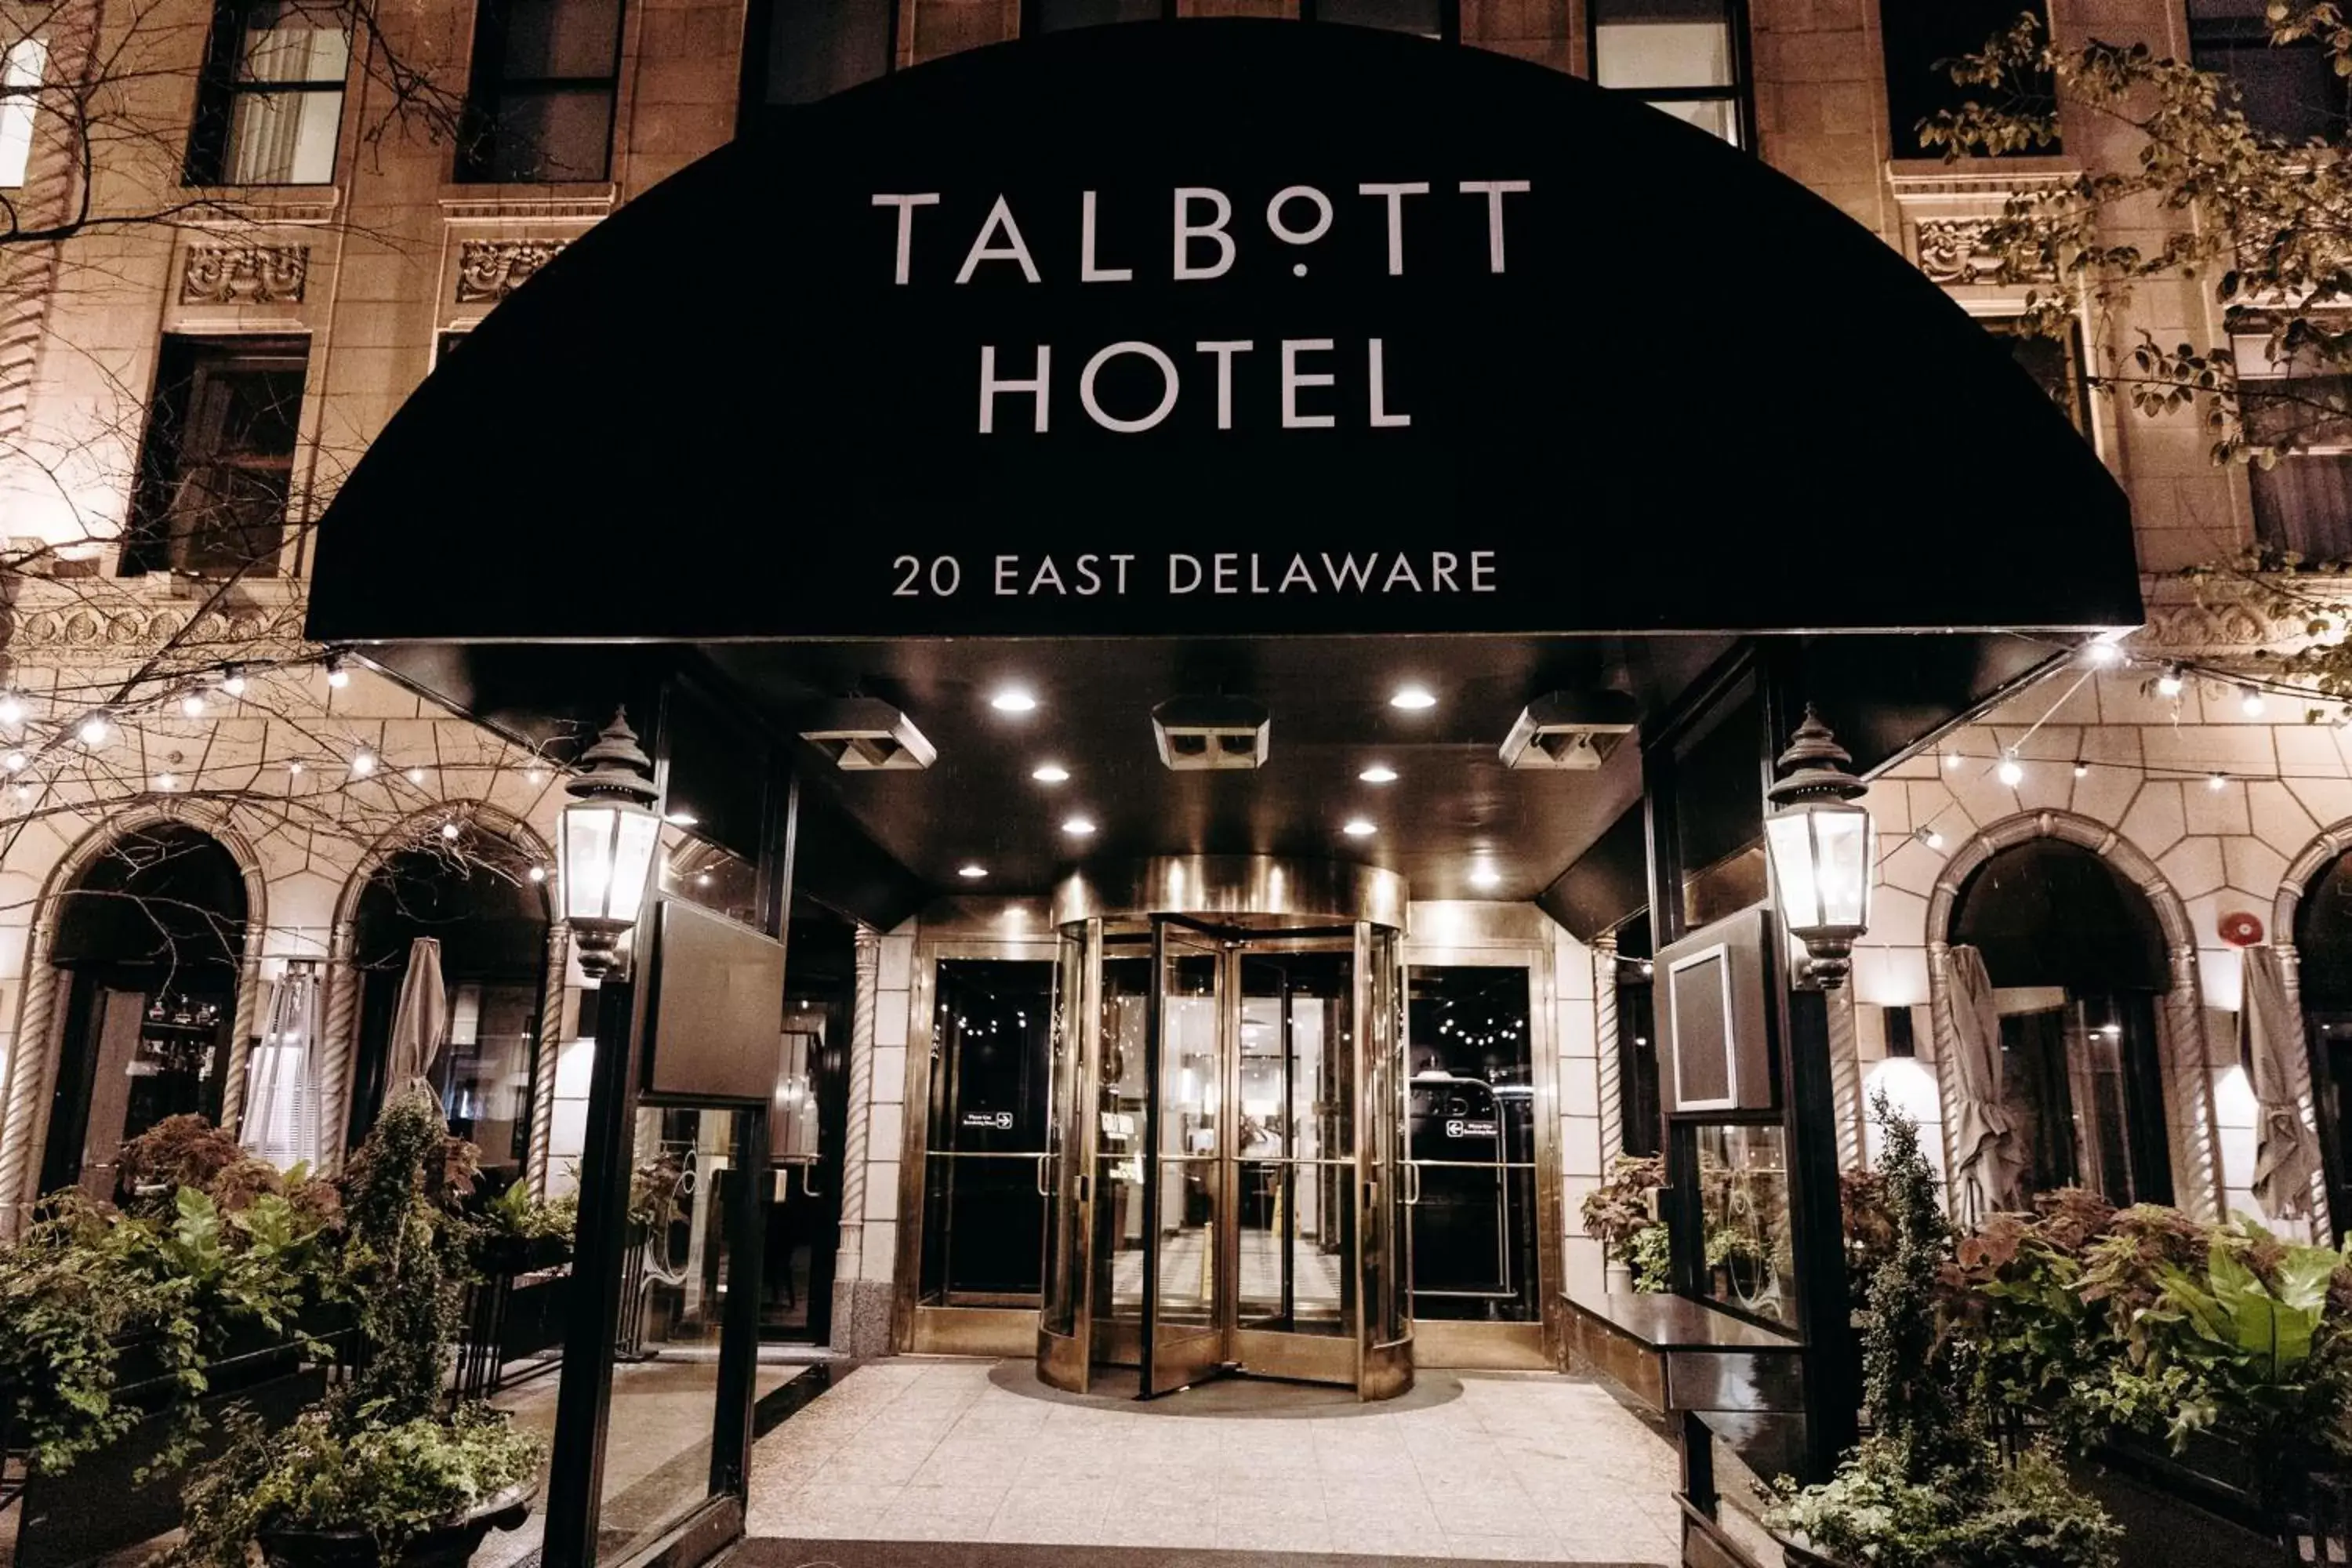 Property building in The Talbott Hotel